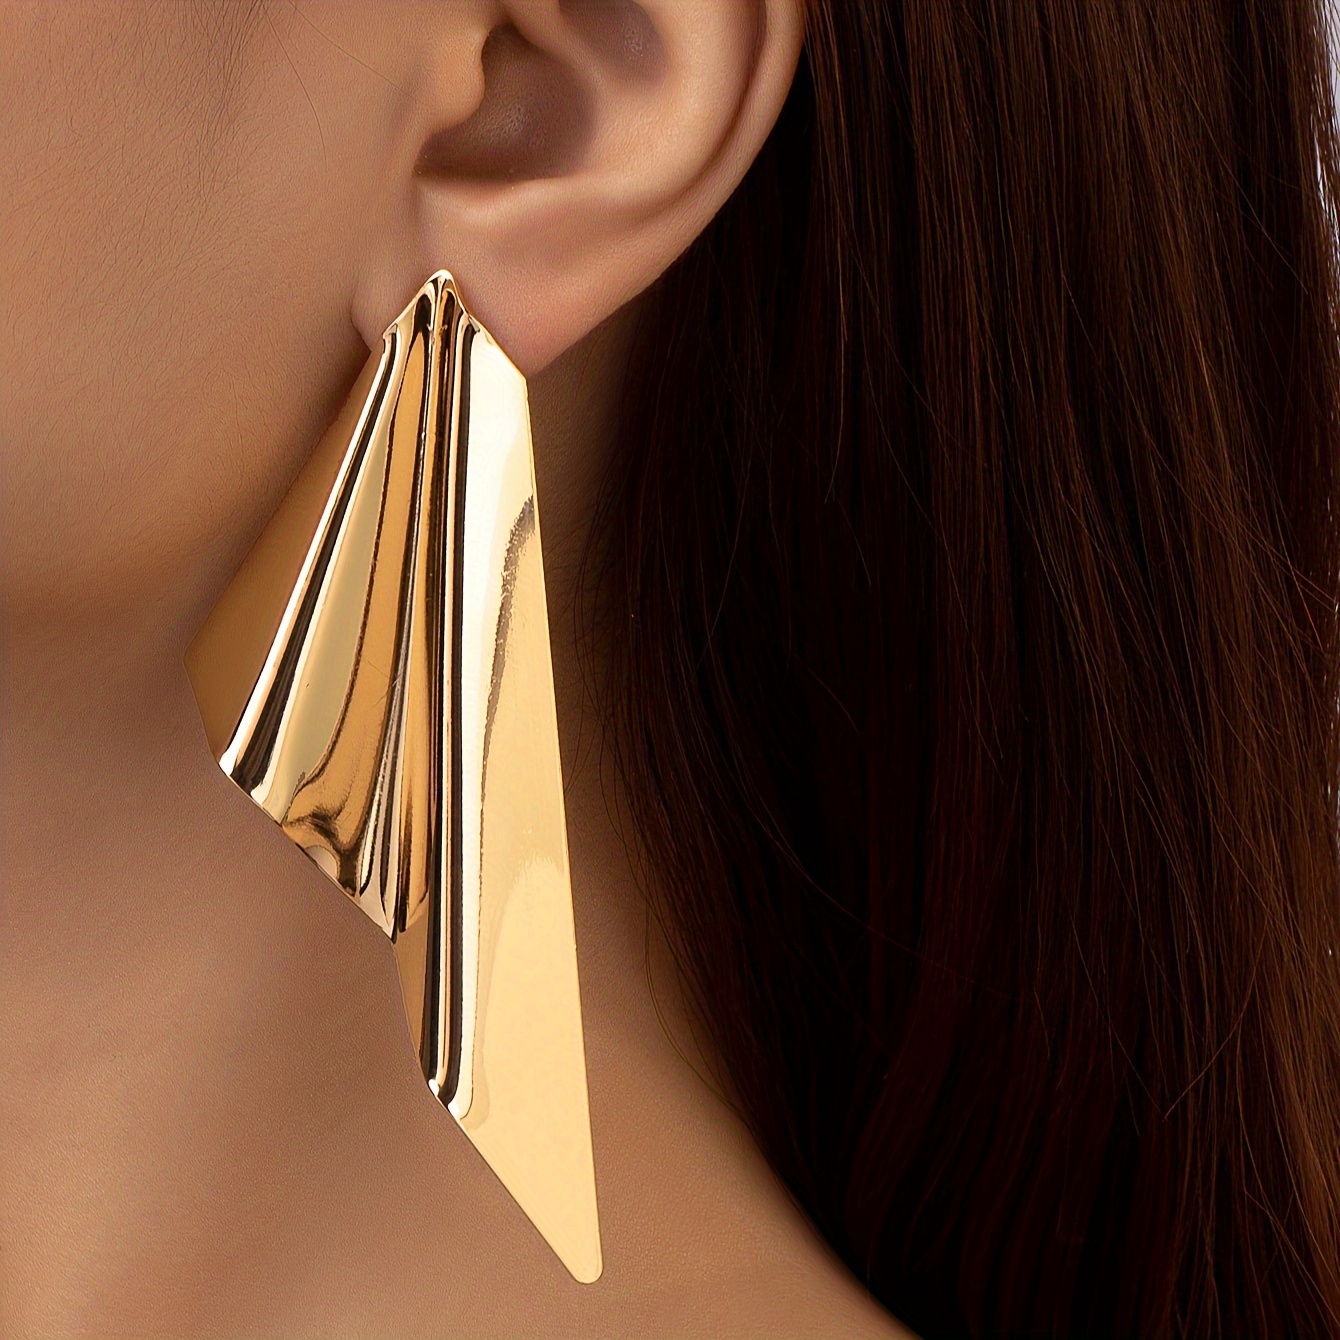 

Versatile Exaggerated Statement Earrings Golden Color Ear Piercing Jewelry Accessory Party Favors